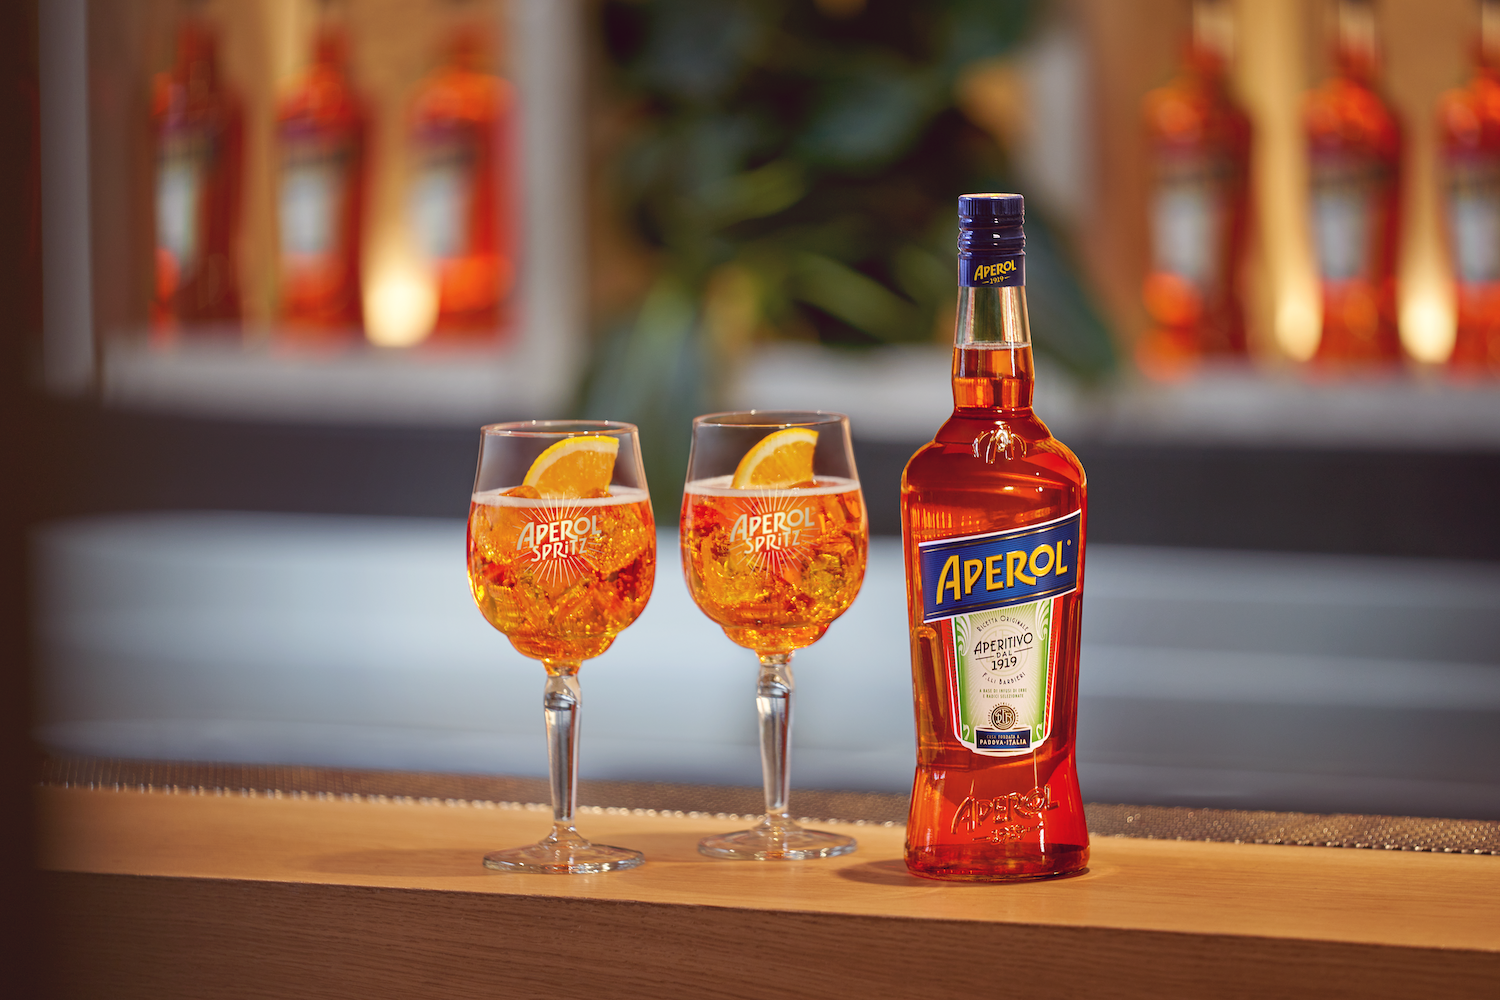 Aperol bottle and 2 glasses